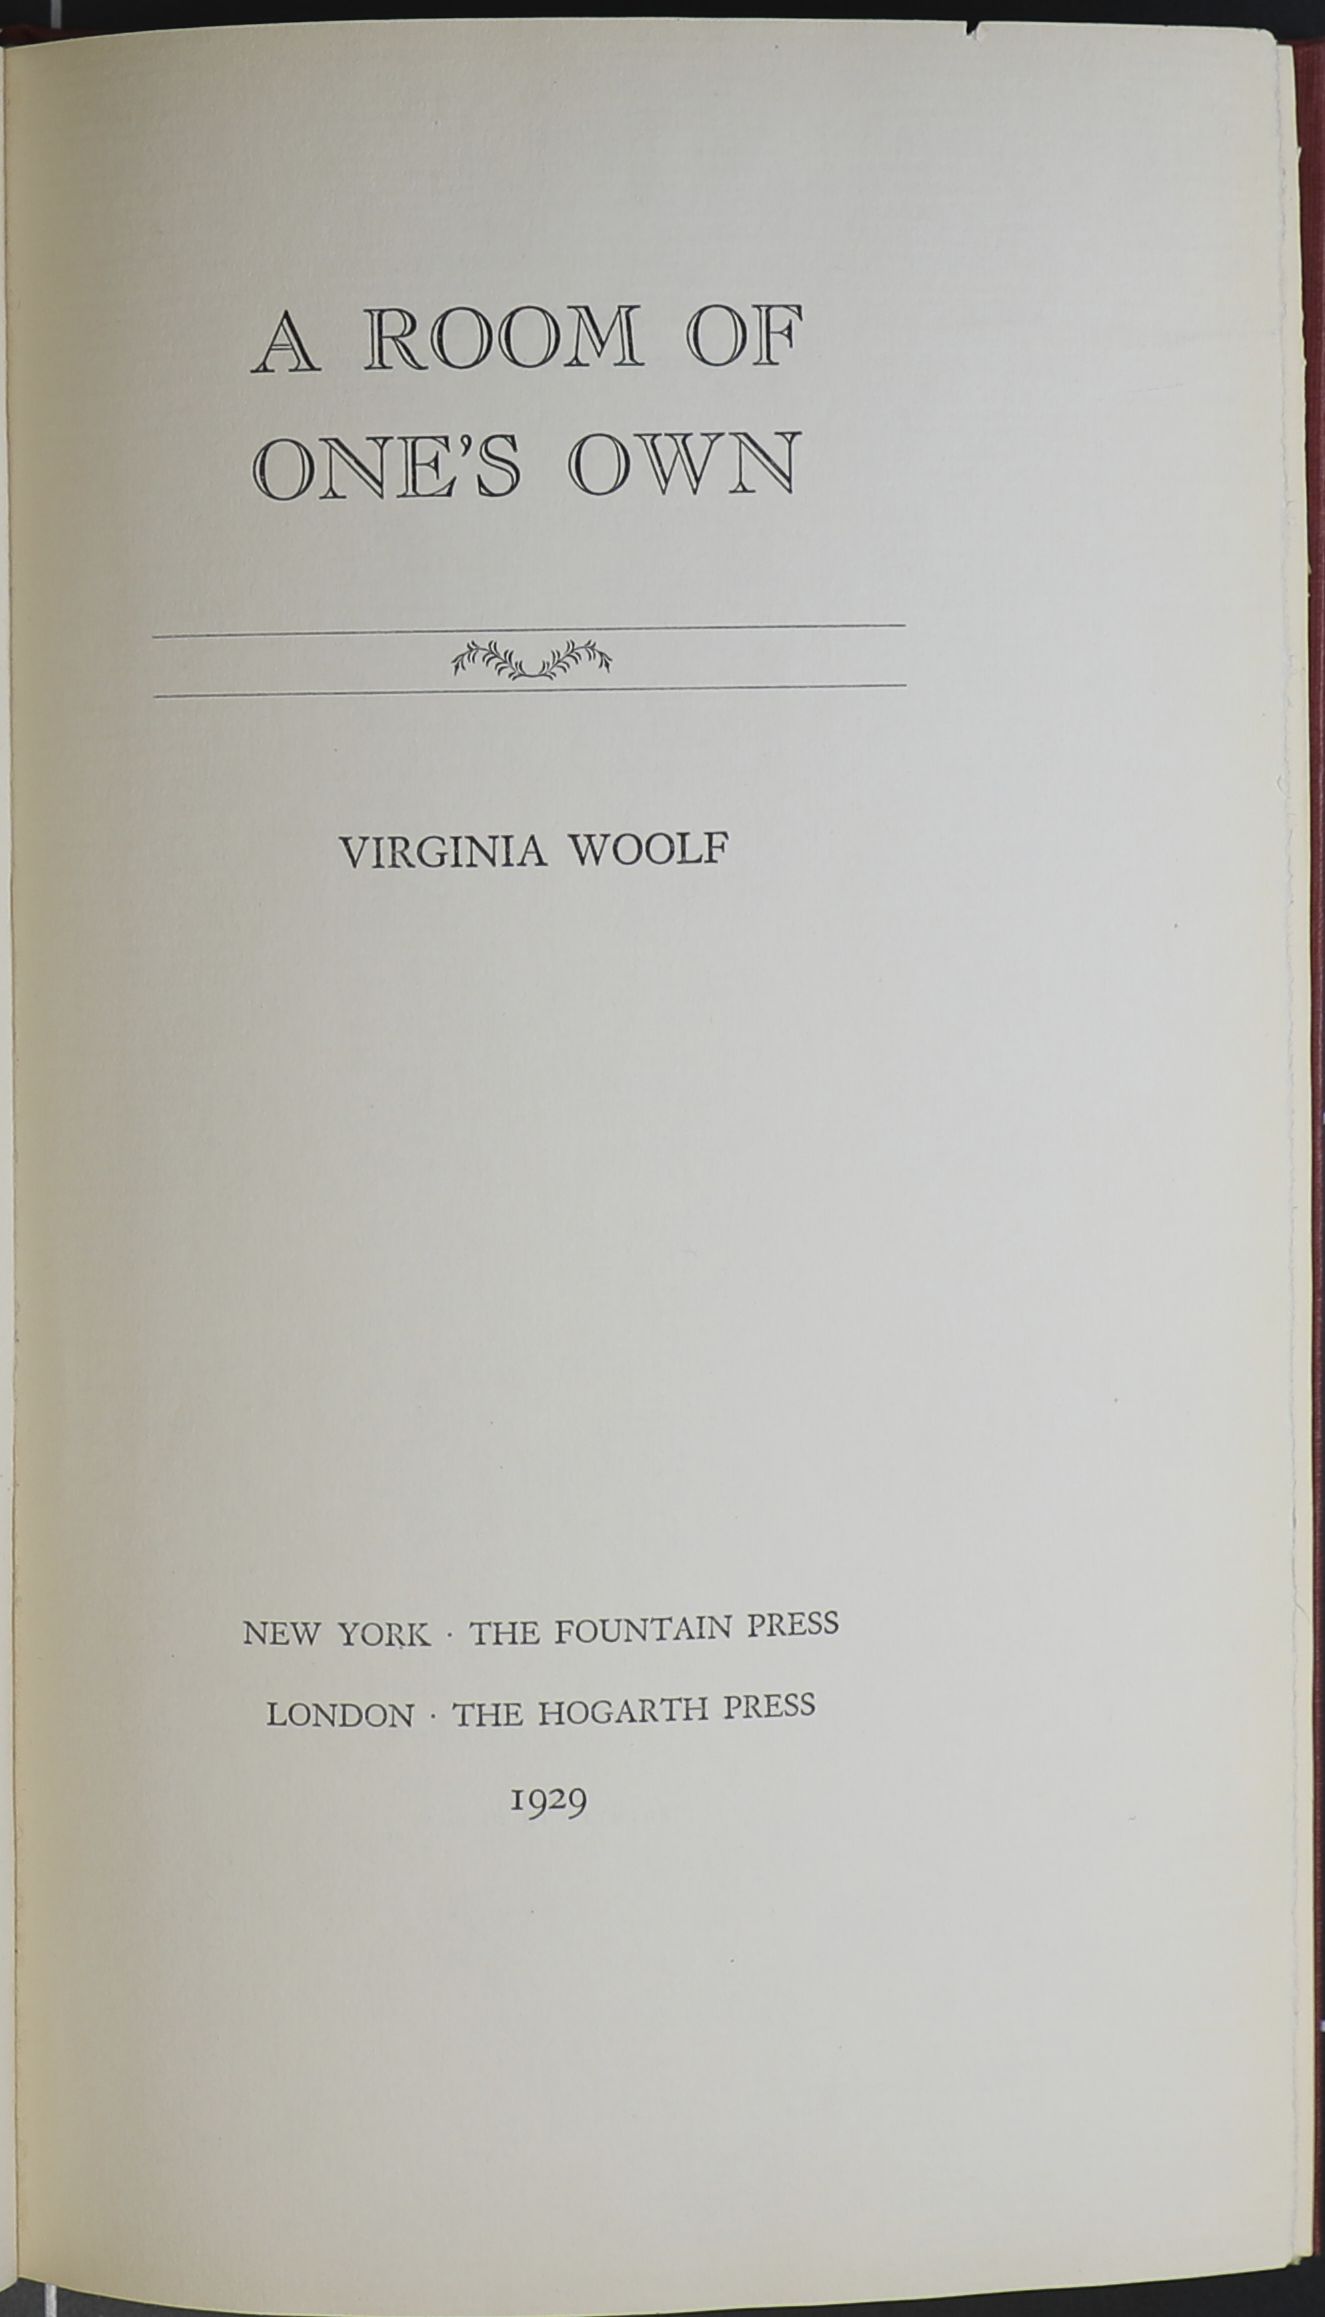 virginia woolf essay a room of one's